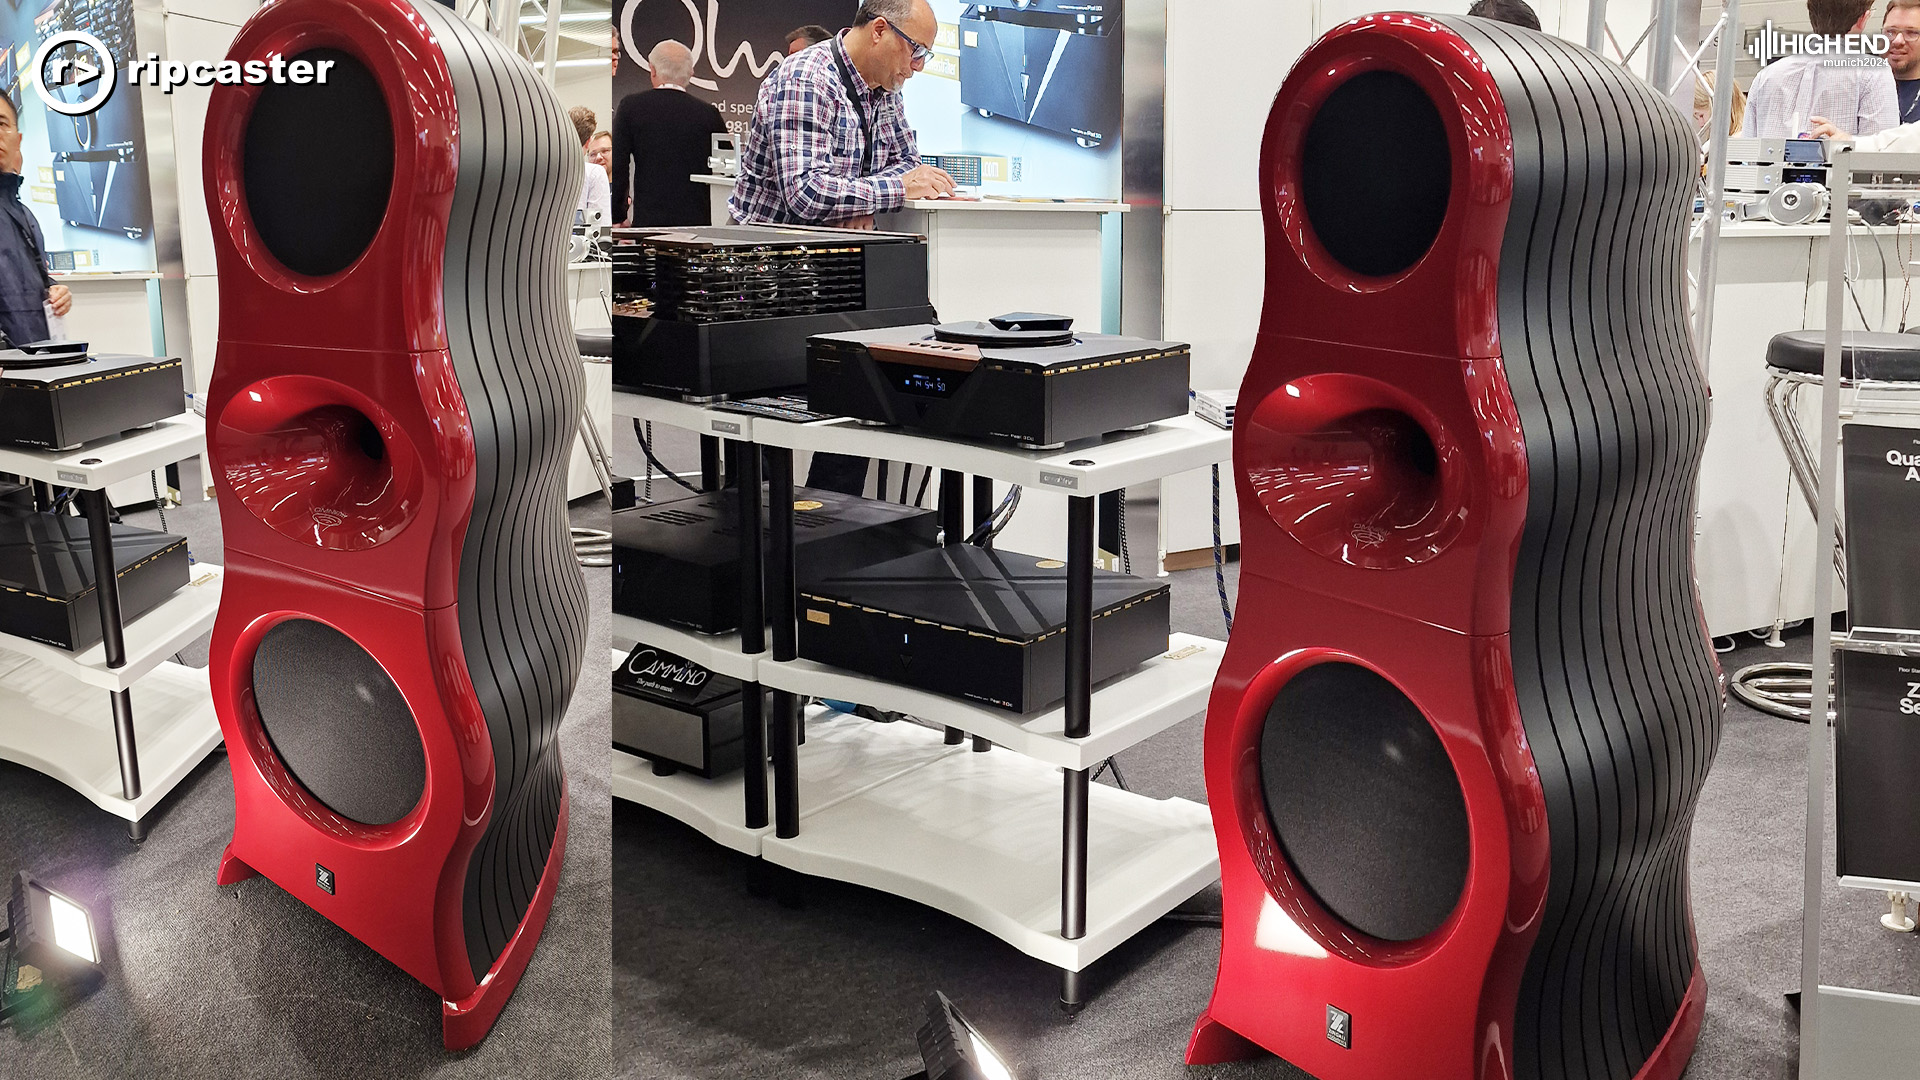 Two different images of the same red floorstanding speaker